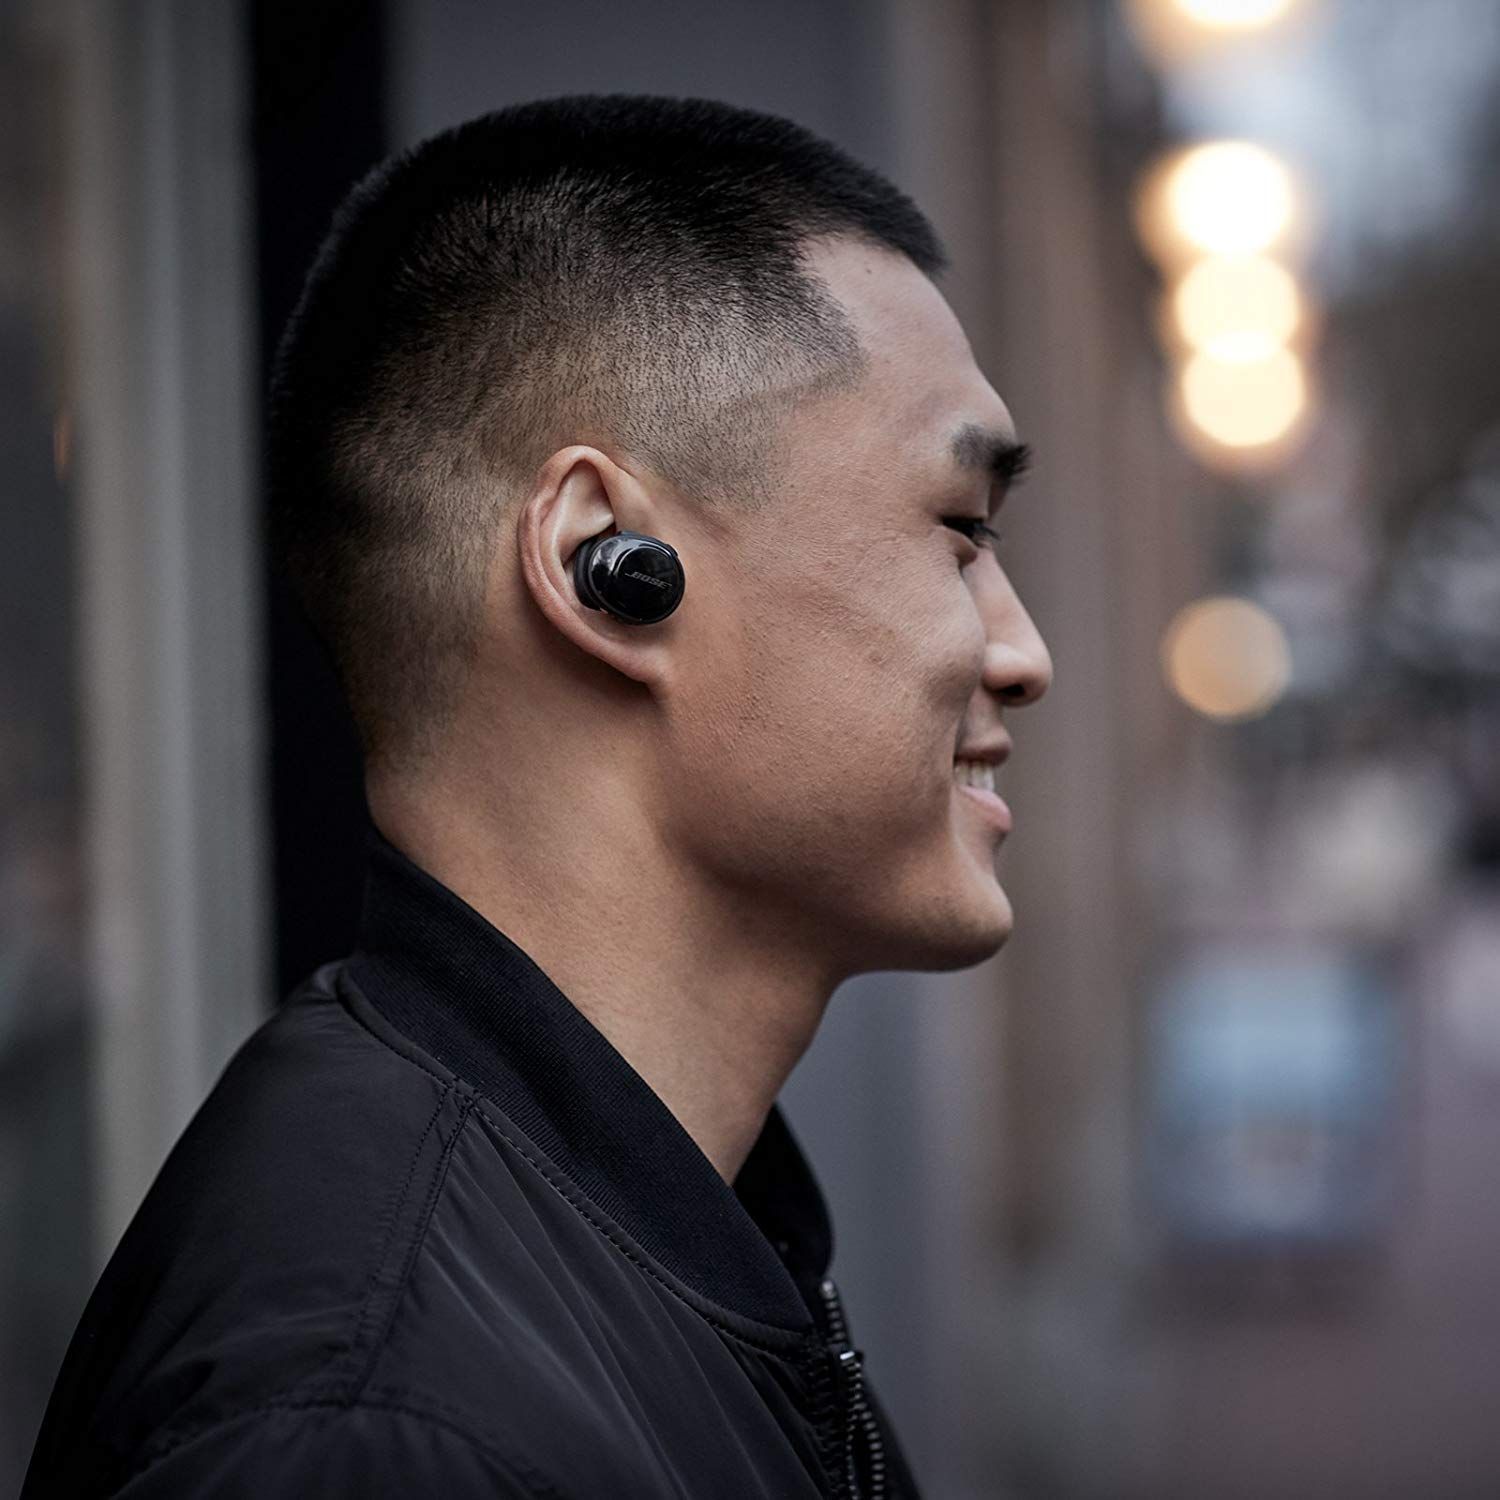 beats wireless earbuds on person